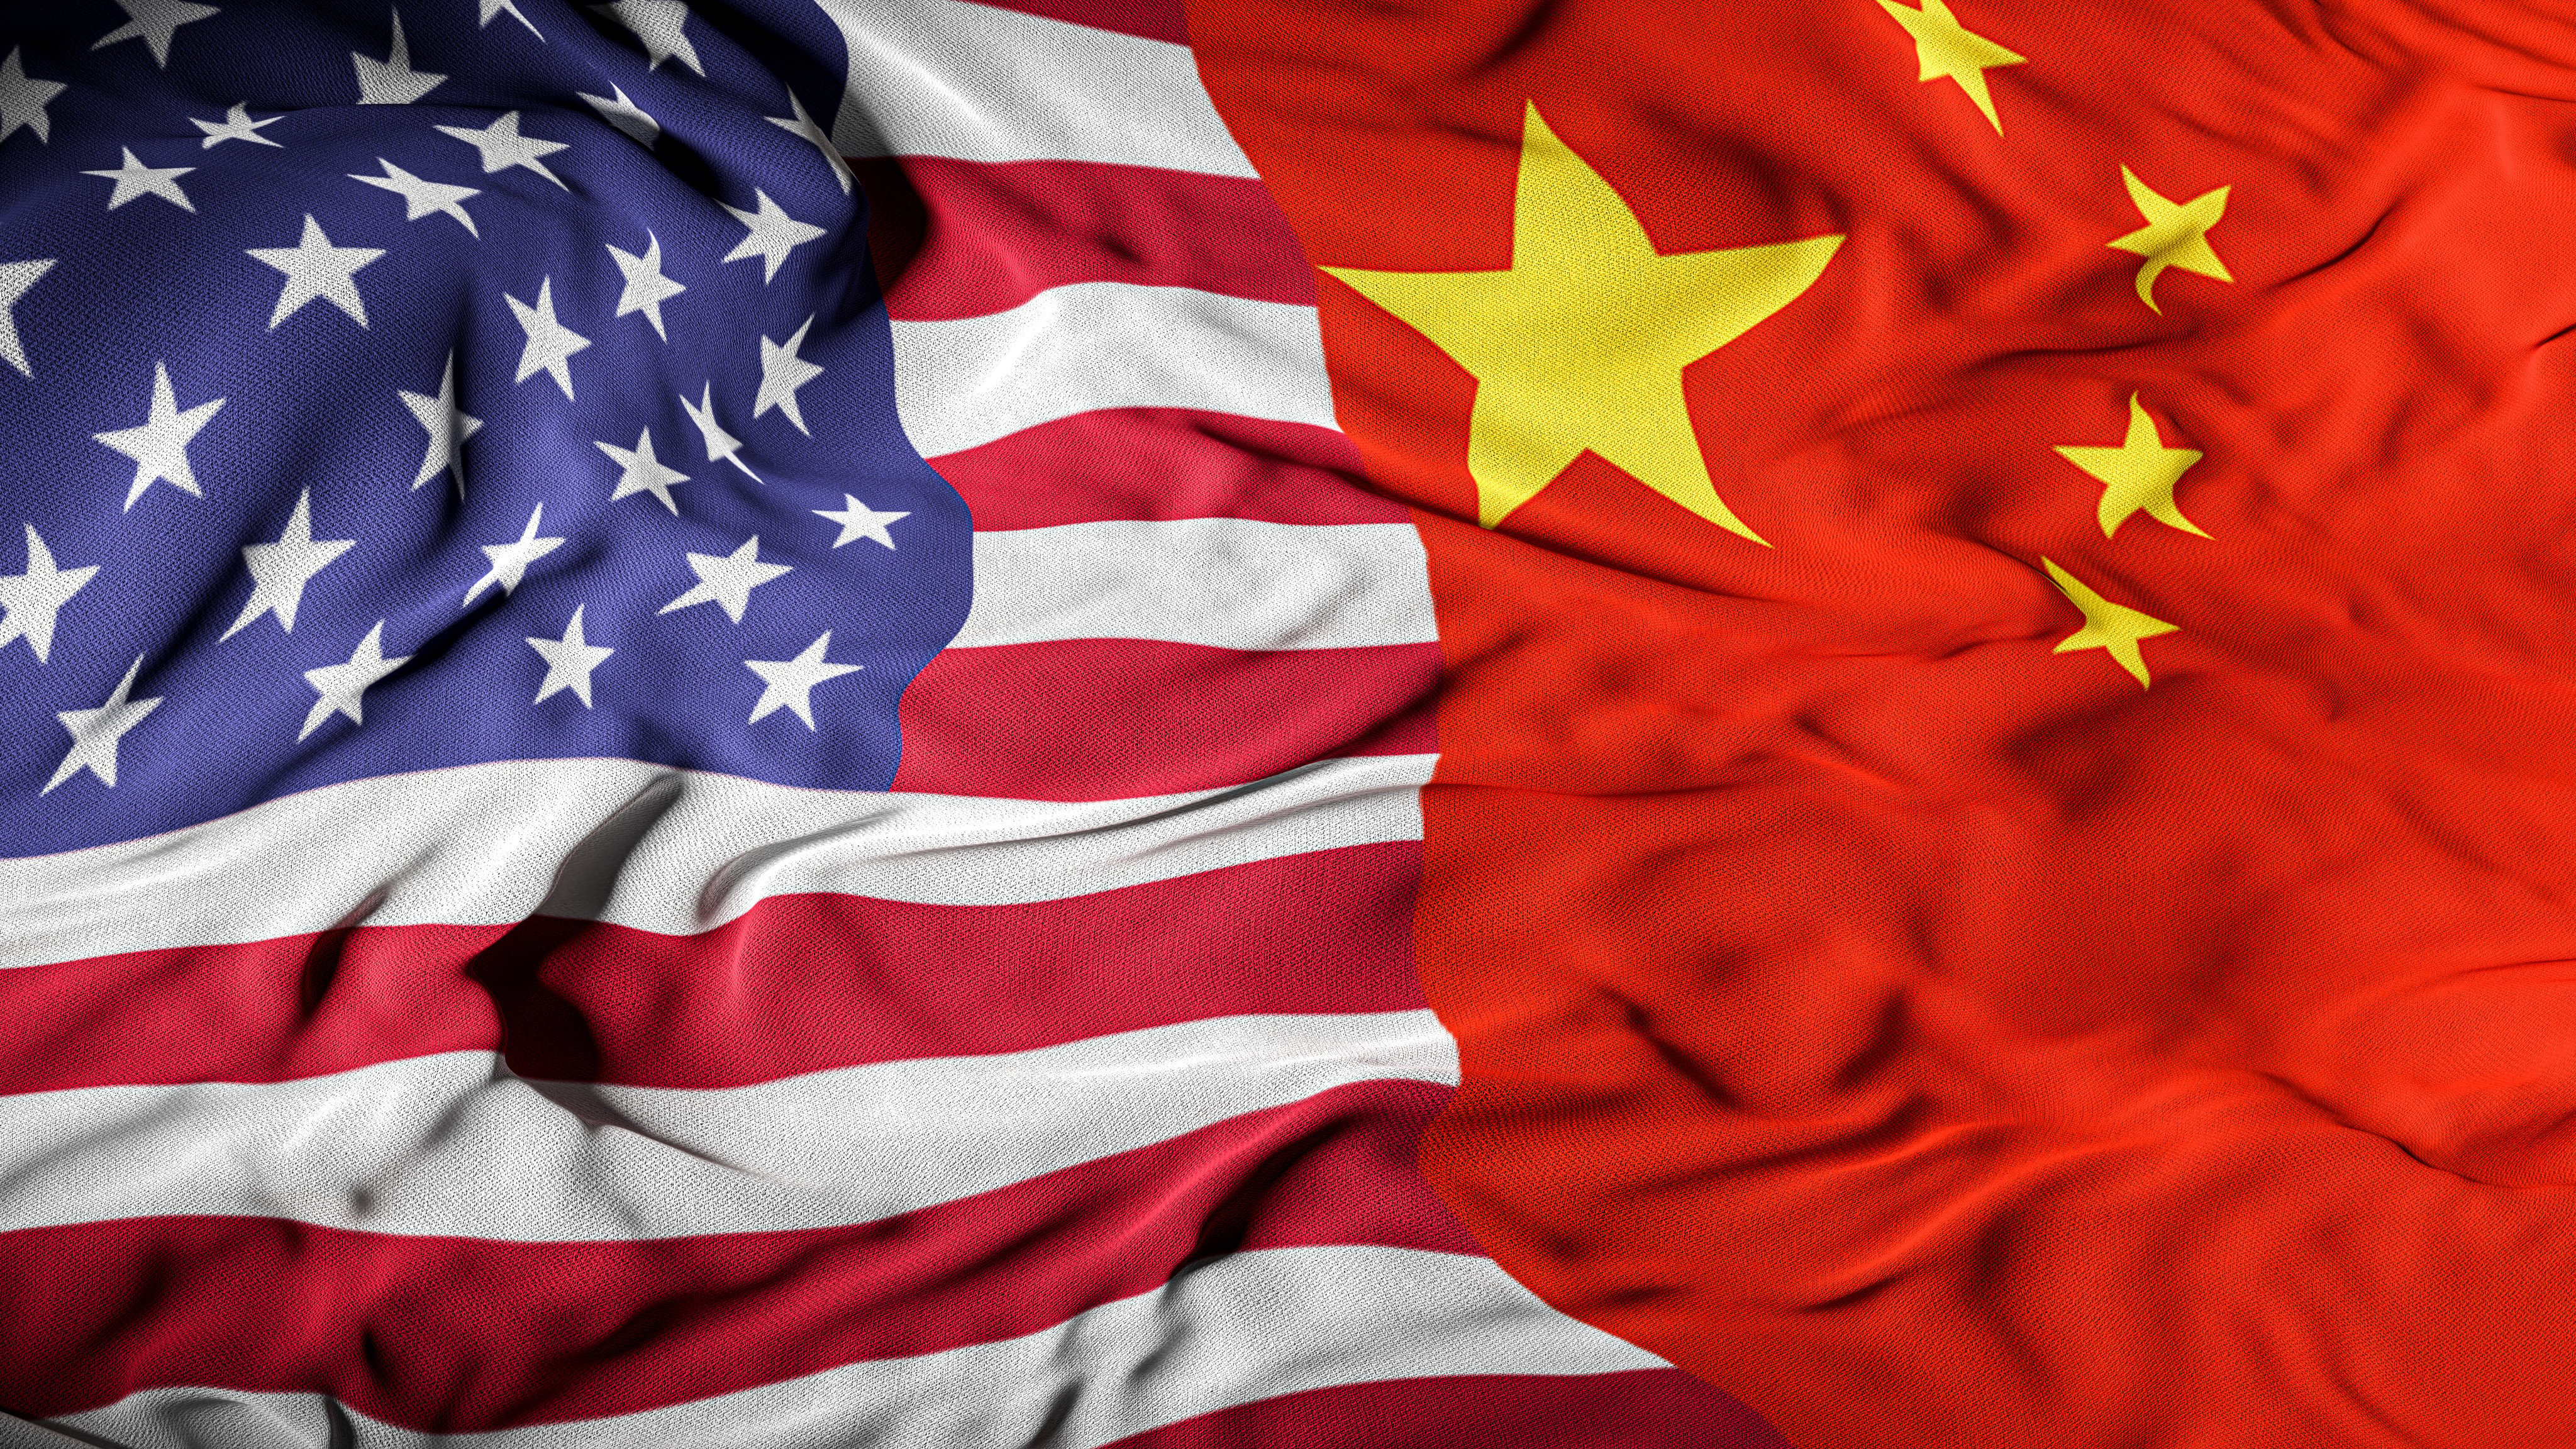 China-US relations ‘relatively more stable’ since Xi-Biden summit in November, according to US ambassador to Beijing Nicholas Burns. Shutterstock